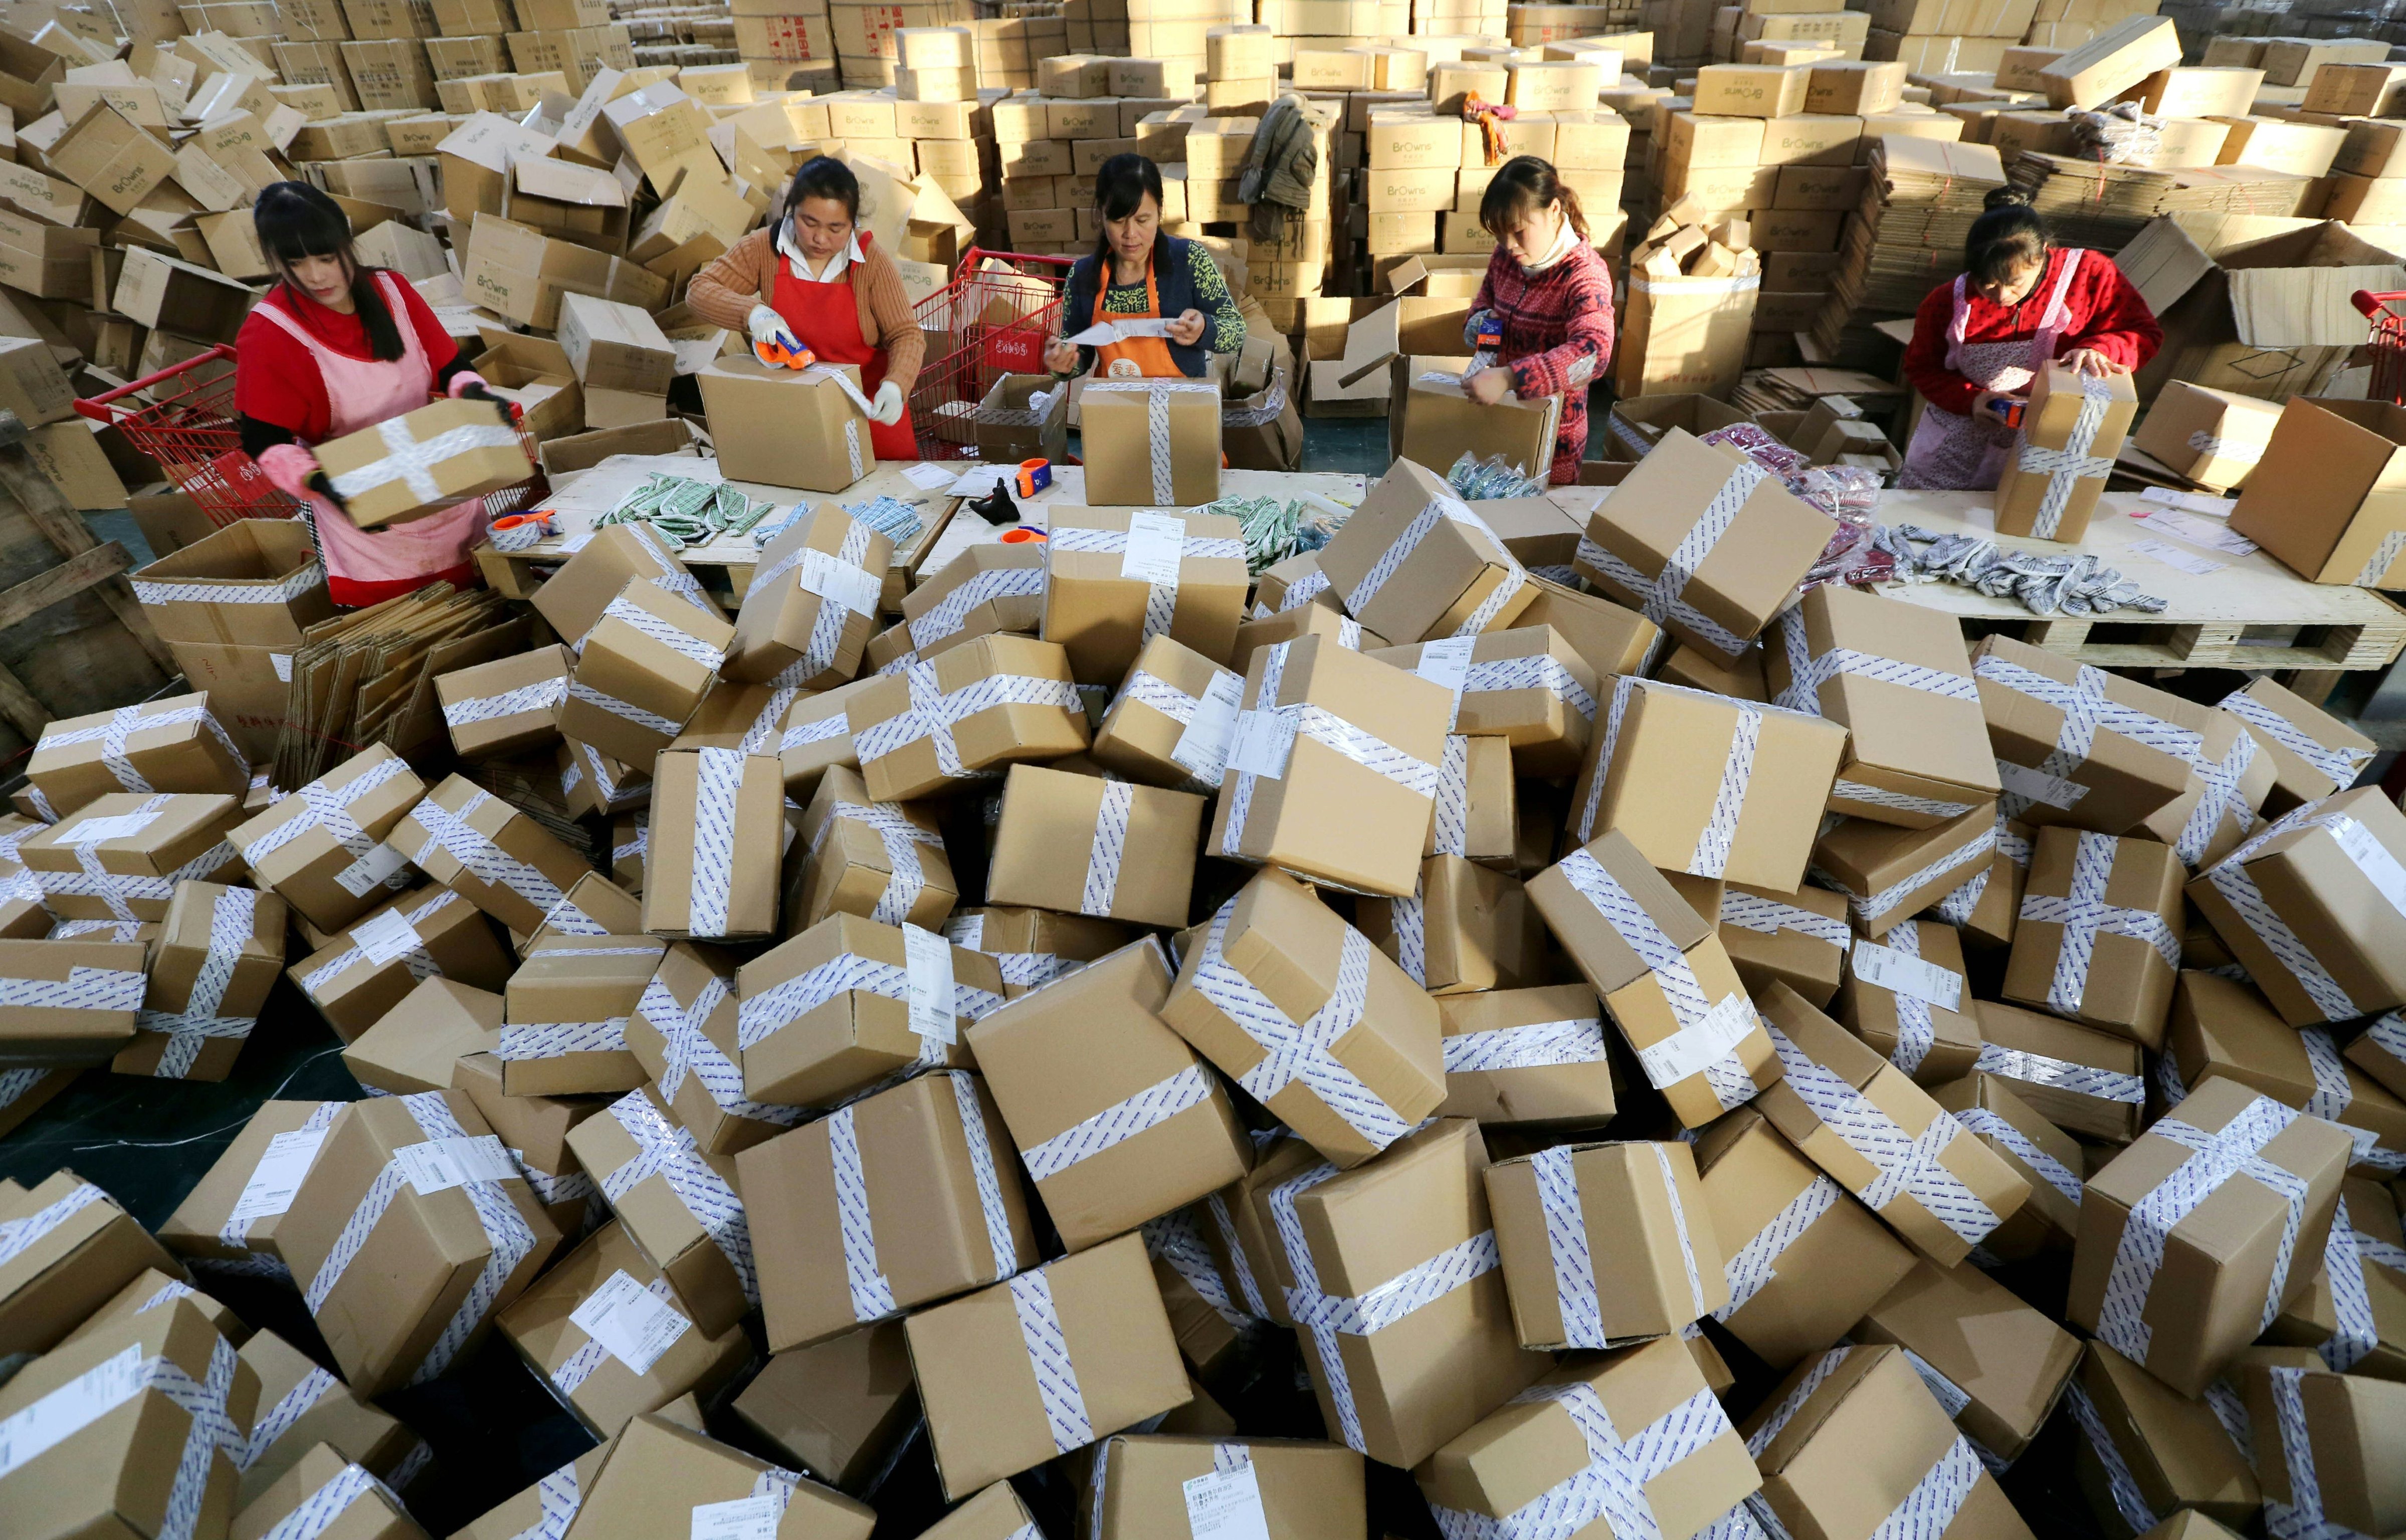 Workers prepare packages for delivery at a sorting center in Lianyungang, Jiangsu for Singles Day on Nov. 11, 2016. (Stringer&mdash;AFP/Getty Images)